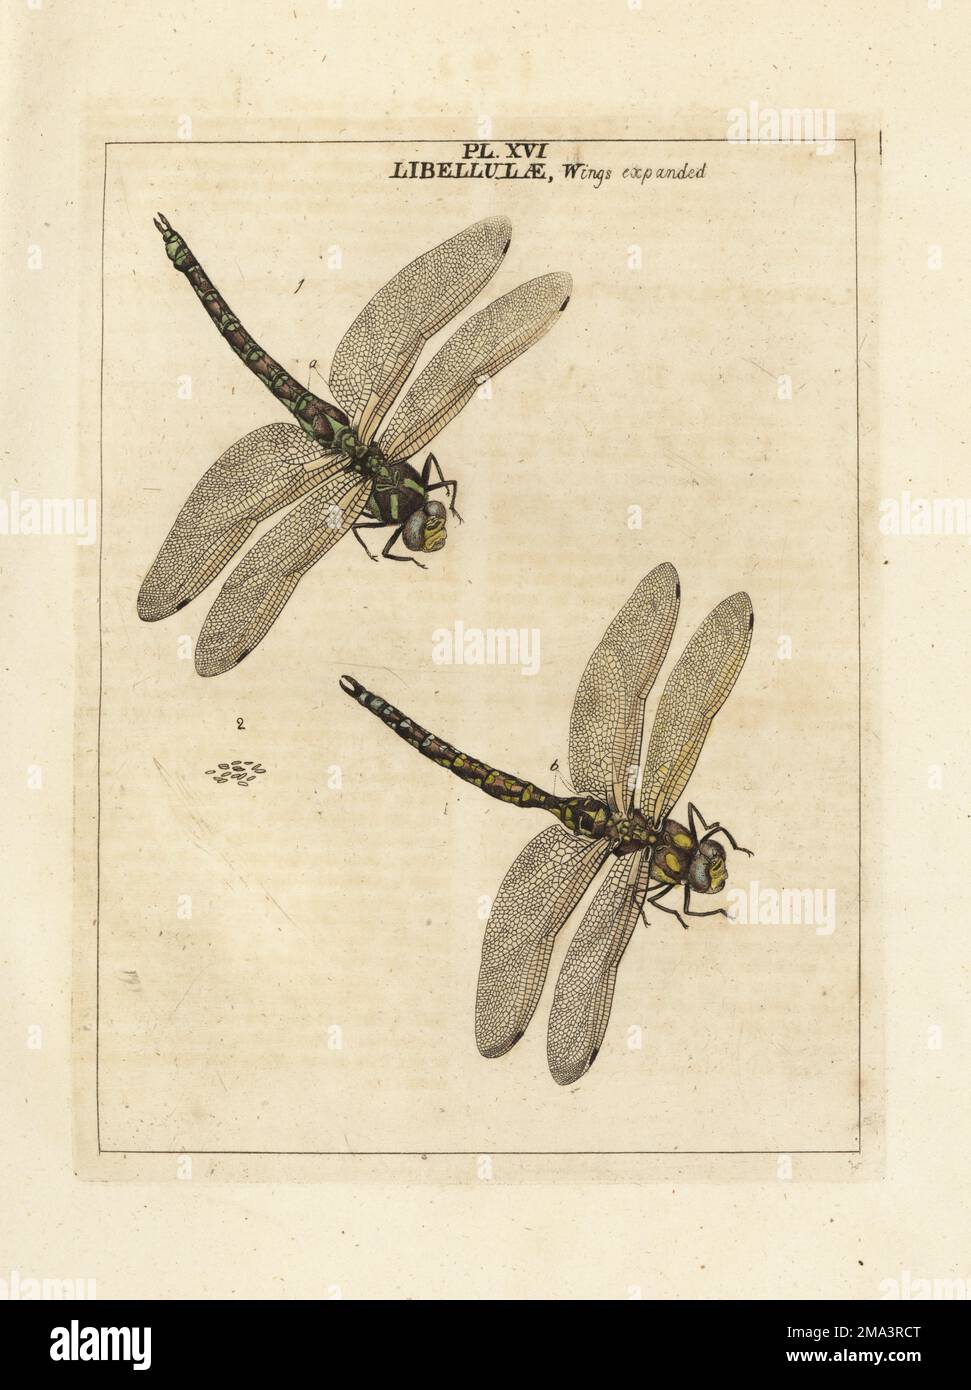 Southern hawker or blue hawker dragonfly, Aeshna cyanea. Male 1, female 2, eggs 3. Large green. Libellulae wings expanded. Handcoloured copperplate engraving drawn and engraved by Moses Harris from his own Exposition of English Insects, Including the several Classes of Neuroptera, Hymenoptera, Diptera, or Bees, Flies and Libellulae, White and Robson, London, 1782. Stock Photo